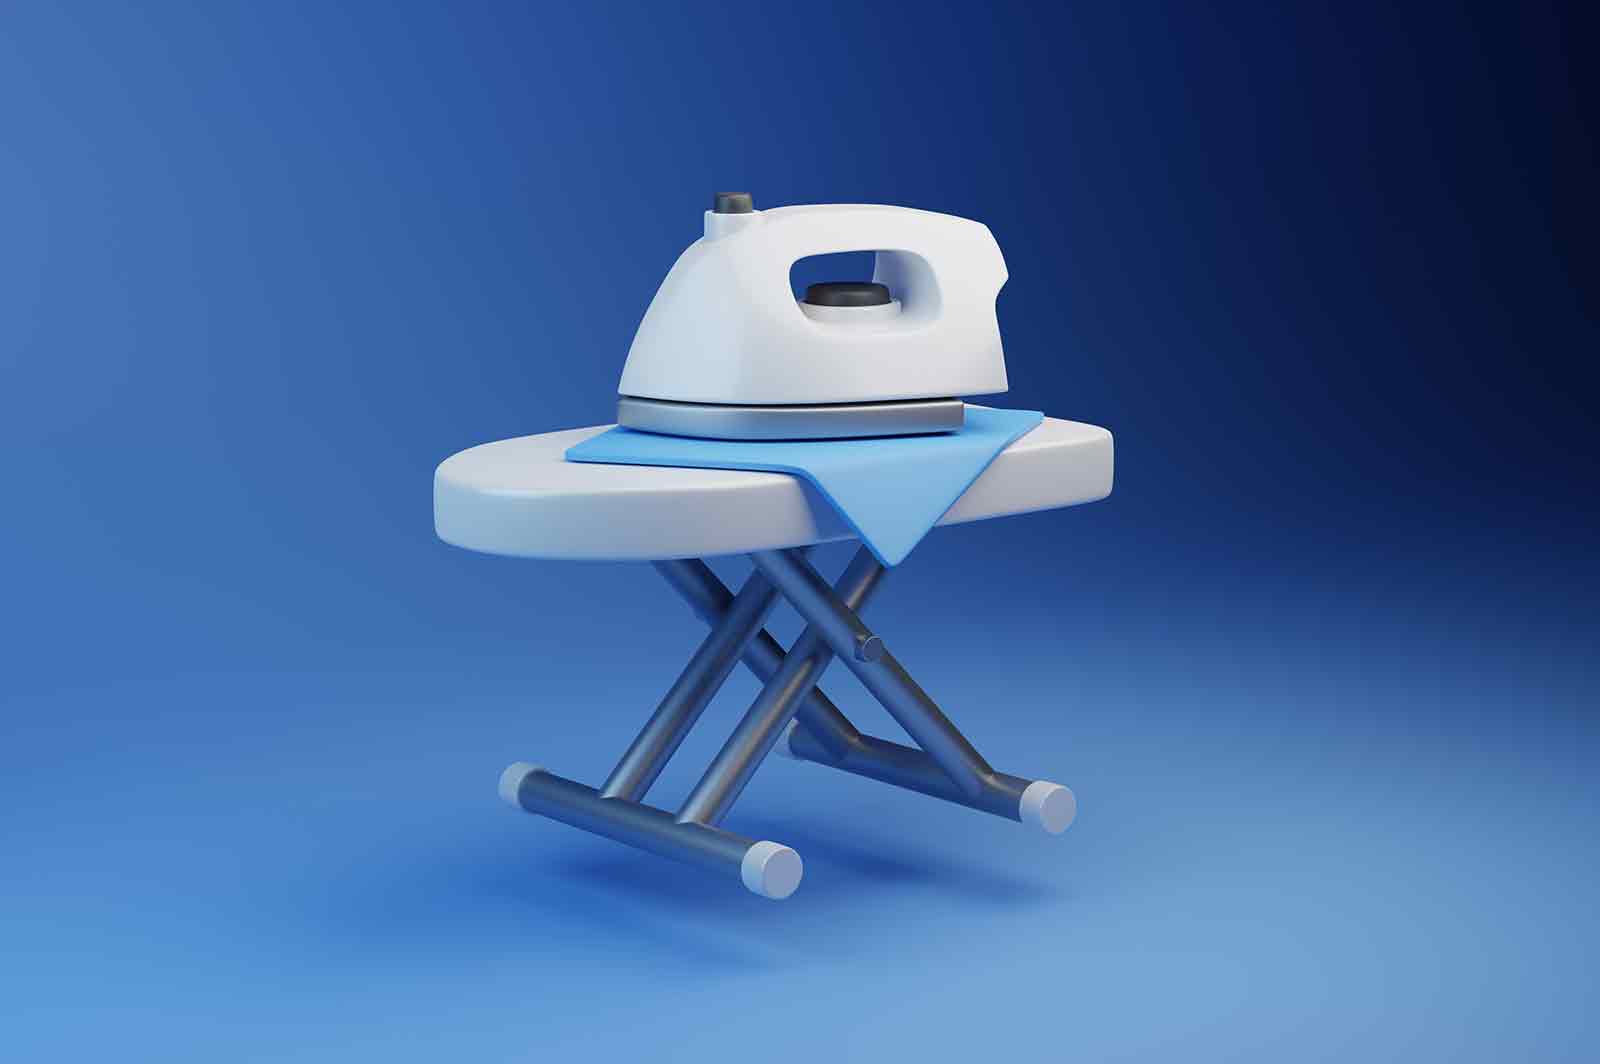 Iron on ironing board 3d rendered illustration. Device for ironing clothes or home appliance. Electric utensil